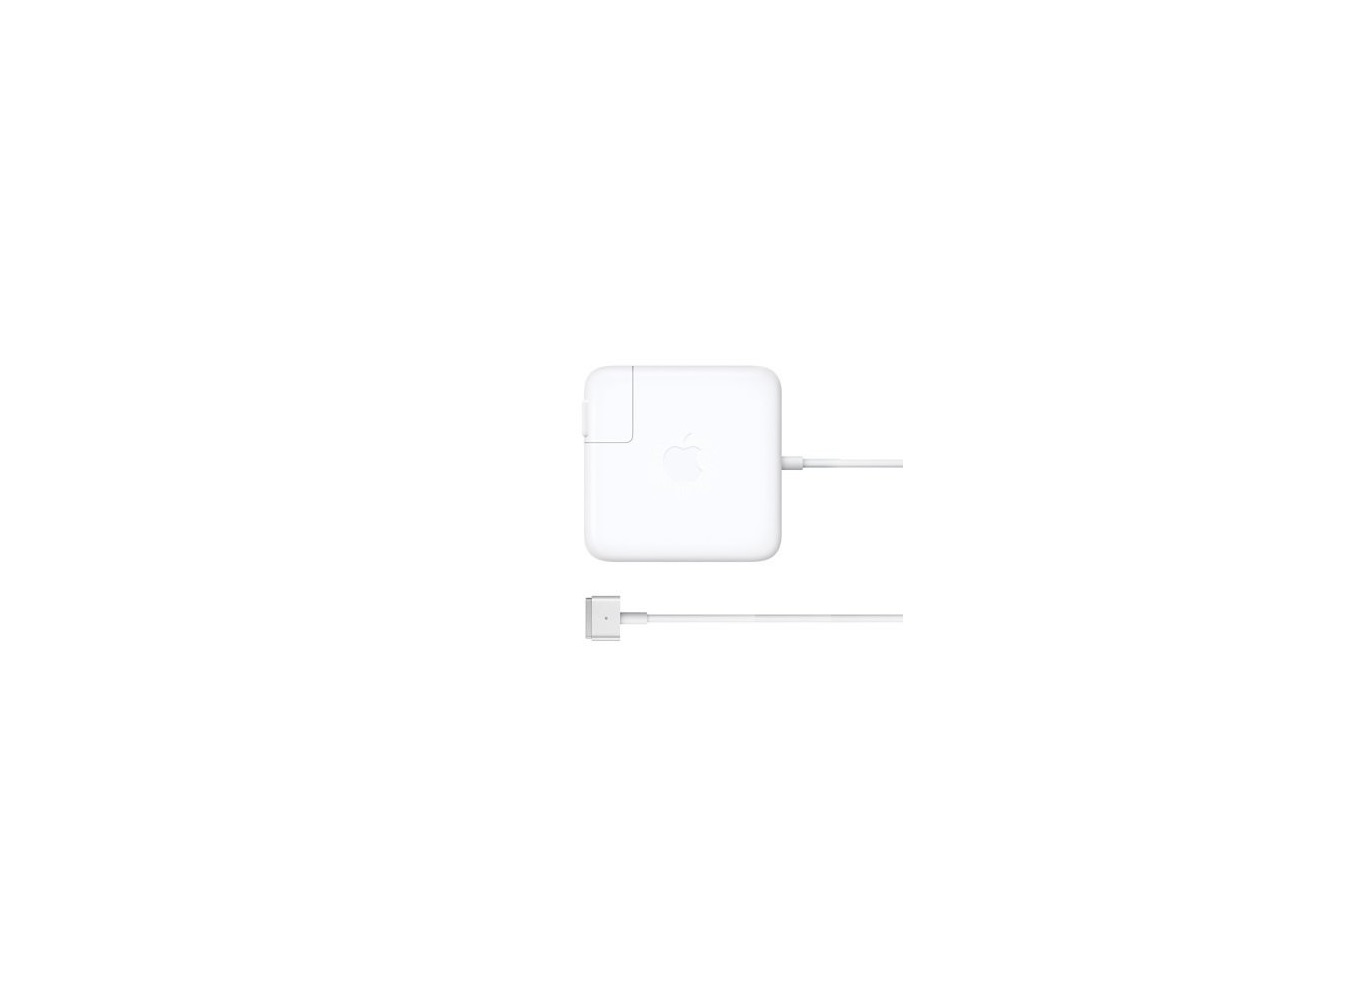 Apple 60Watt Magsafe 2 Power Adapter For Macbook Pro With 13in Retina Display MD565LL/A